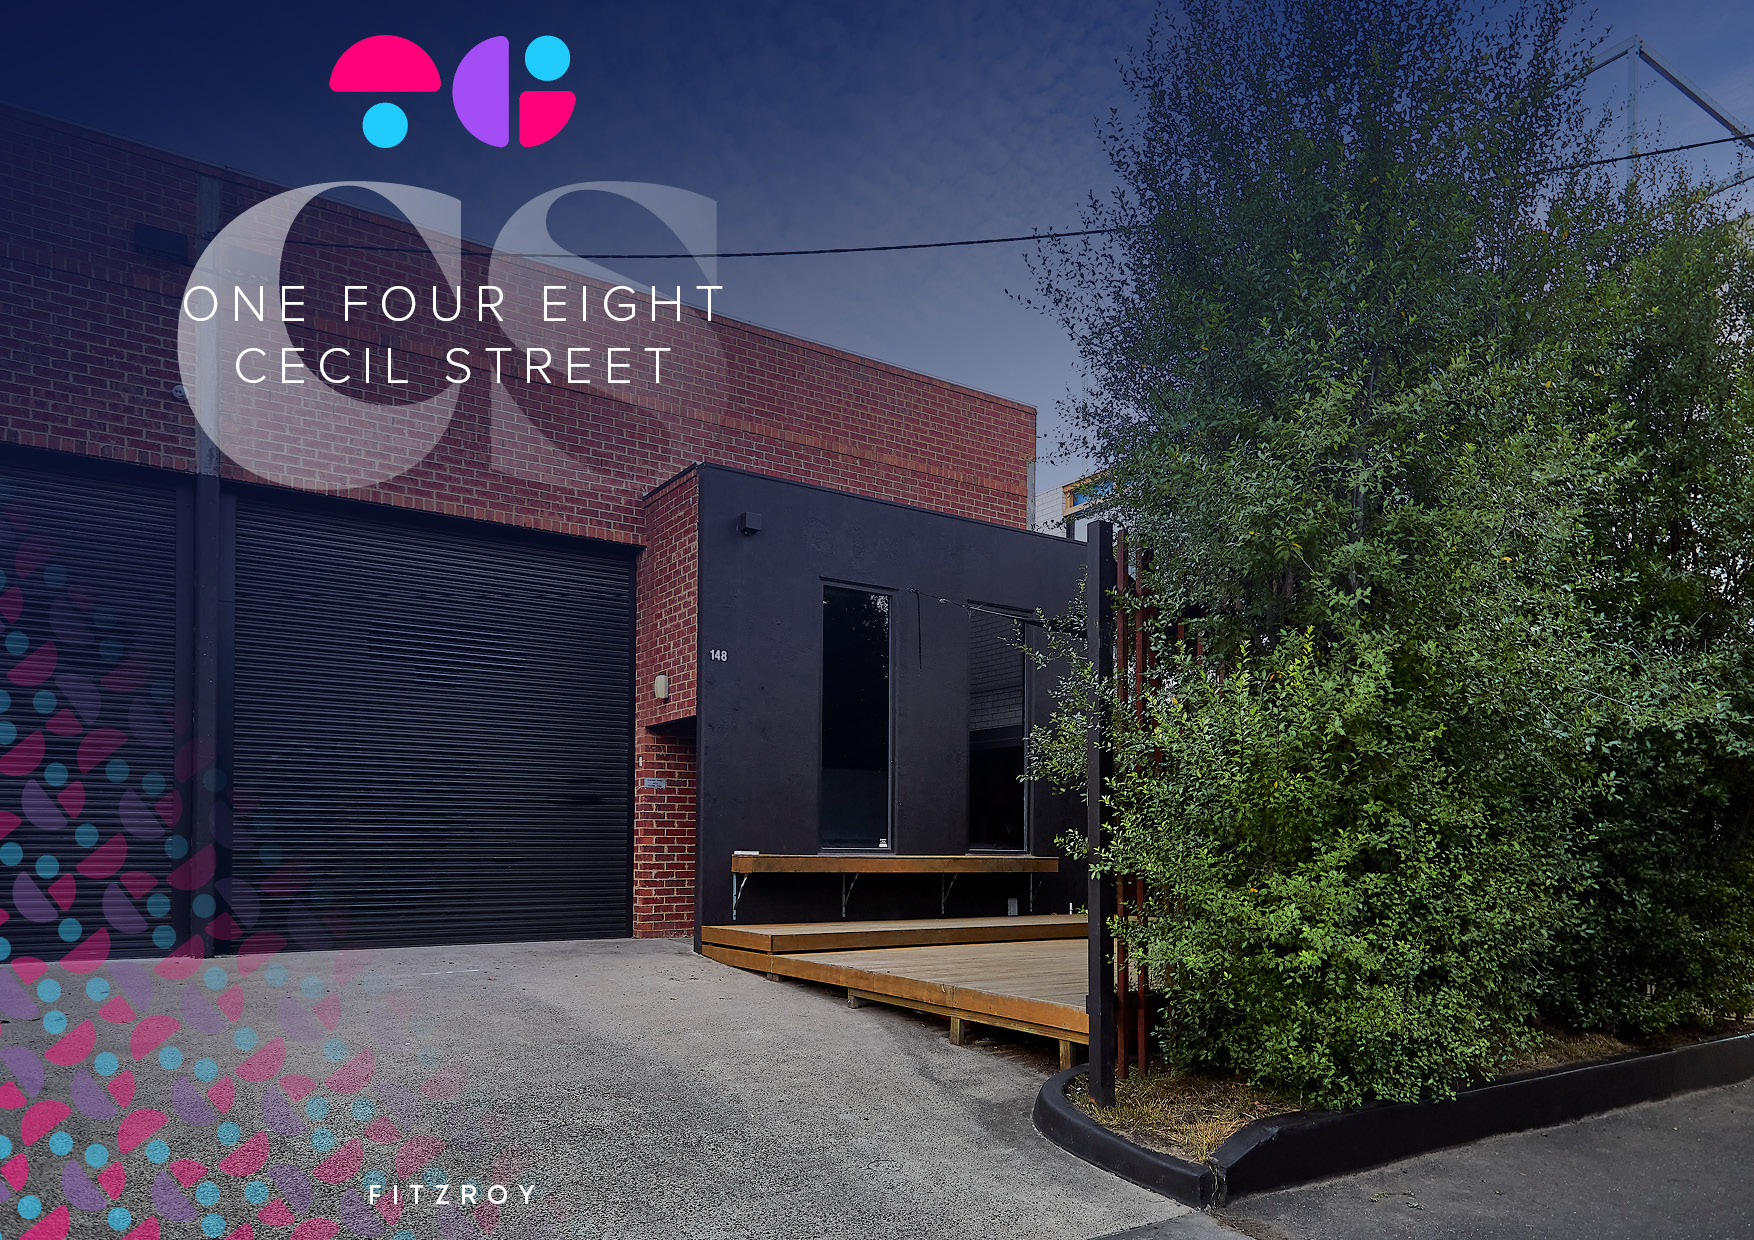 Sale 148 Cecil Street Fitzroy Warehouse Commercial Real Estate